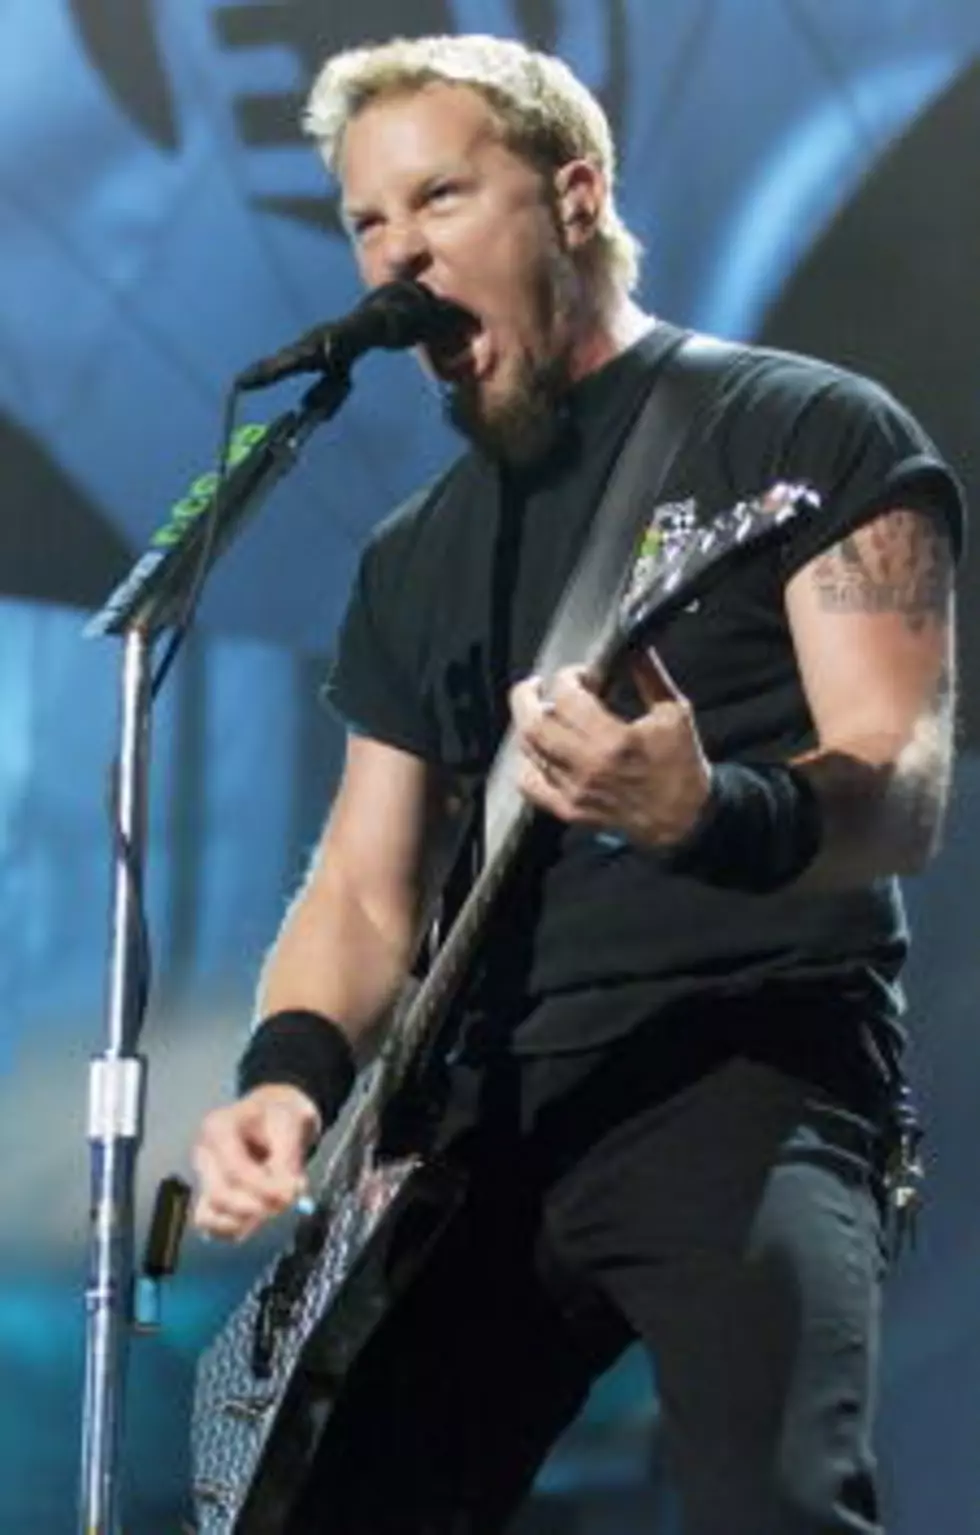 Watch Metallica’s Entire Blizzcon 2014 Performance Here